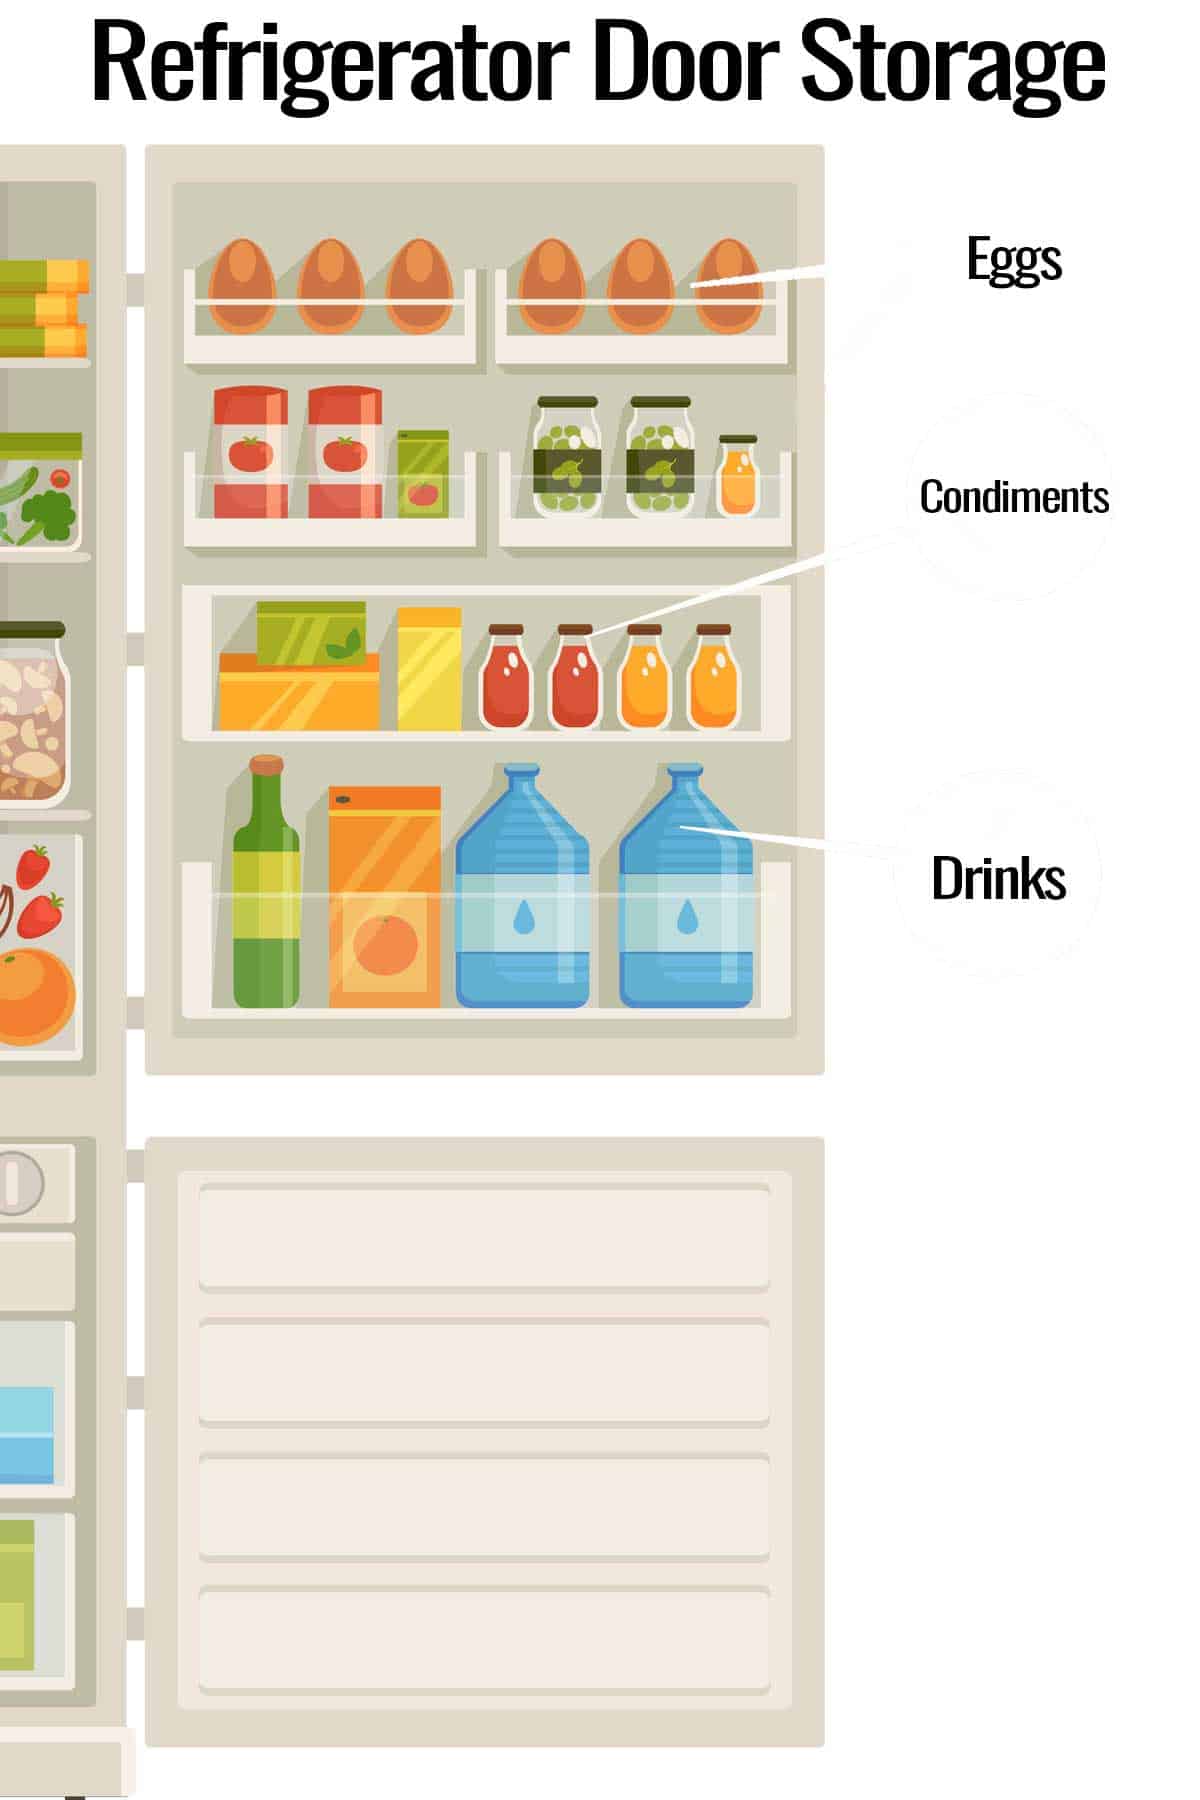 Illustration of the door of the fridge showing eggs, condiments, and drinks stored there.